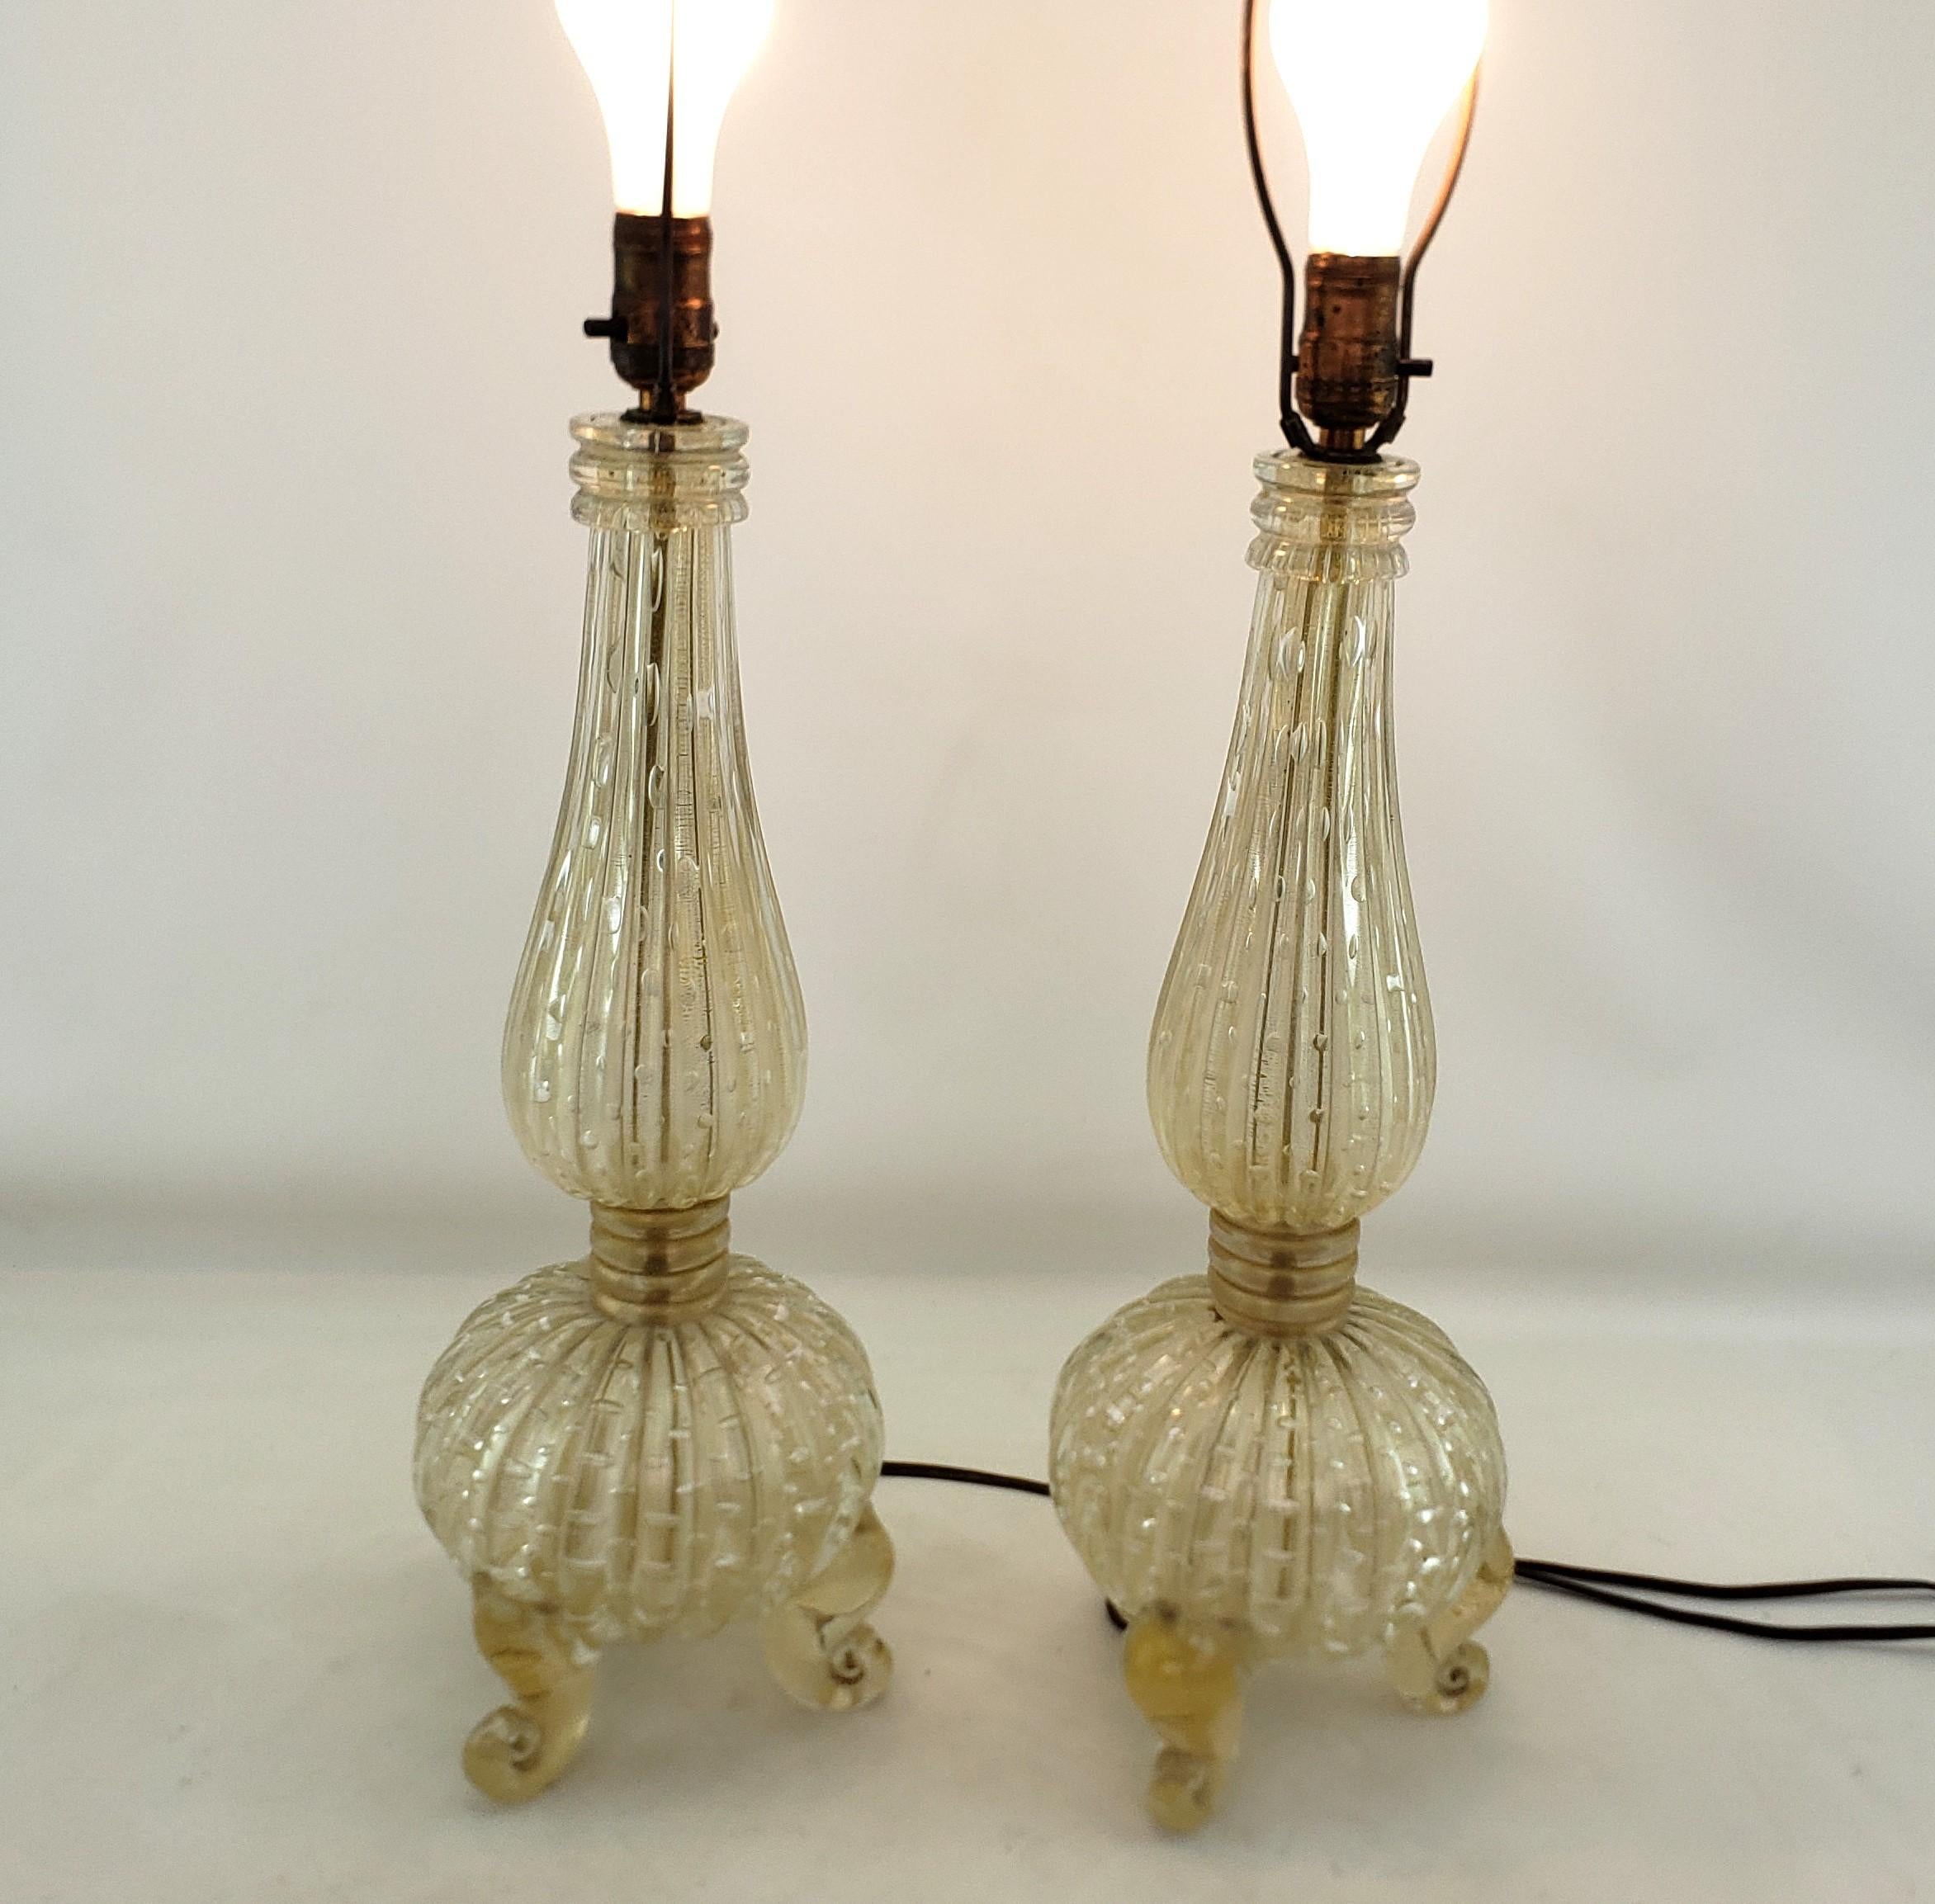 Pair of BarovierAttributed  Mid-Century Modern Murano Art Glass Table Lamps  In Good Condition For Sale In Hamilton, Ontario